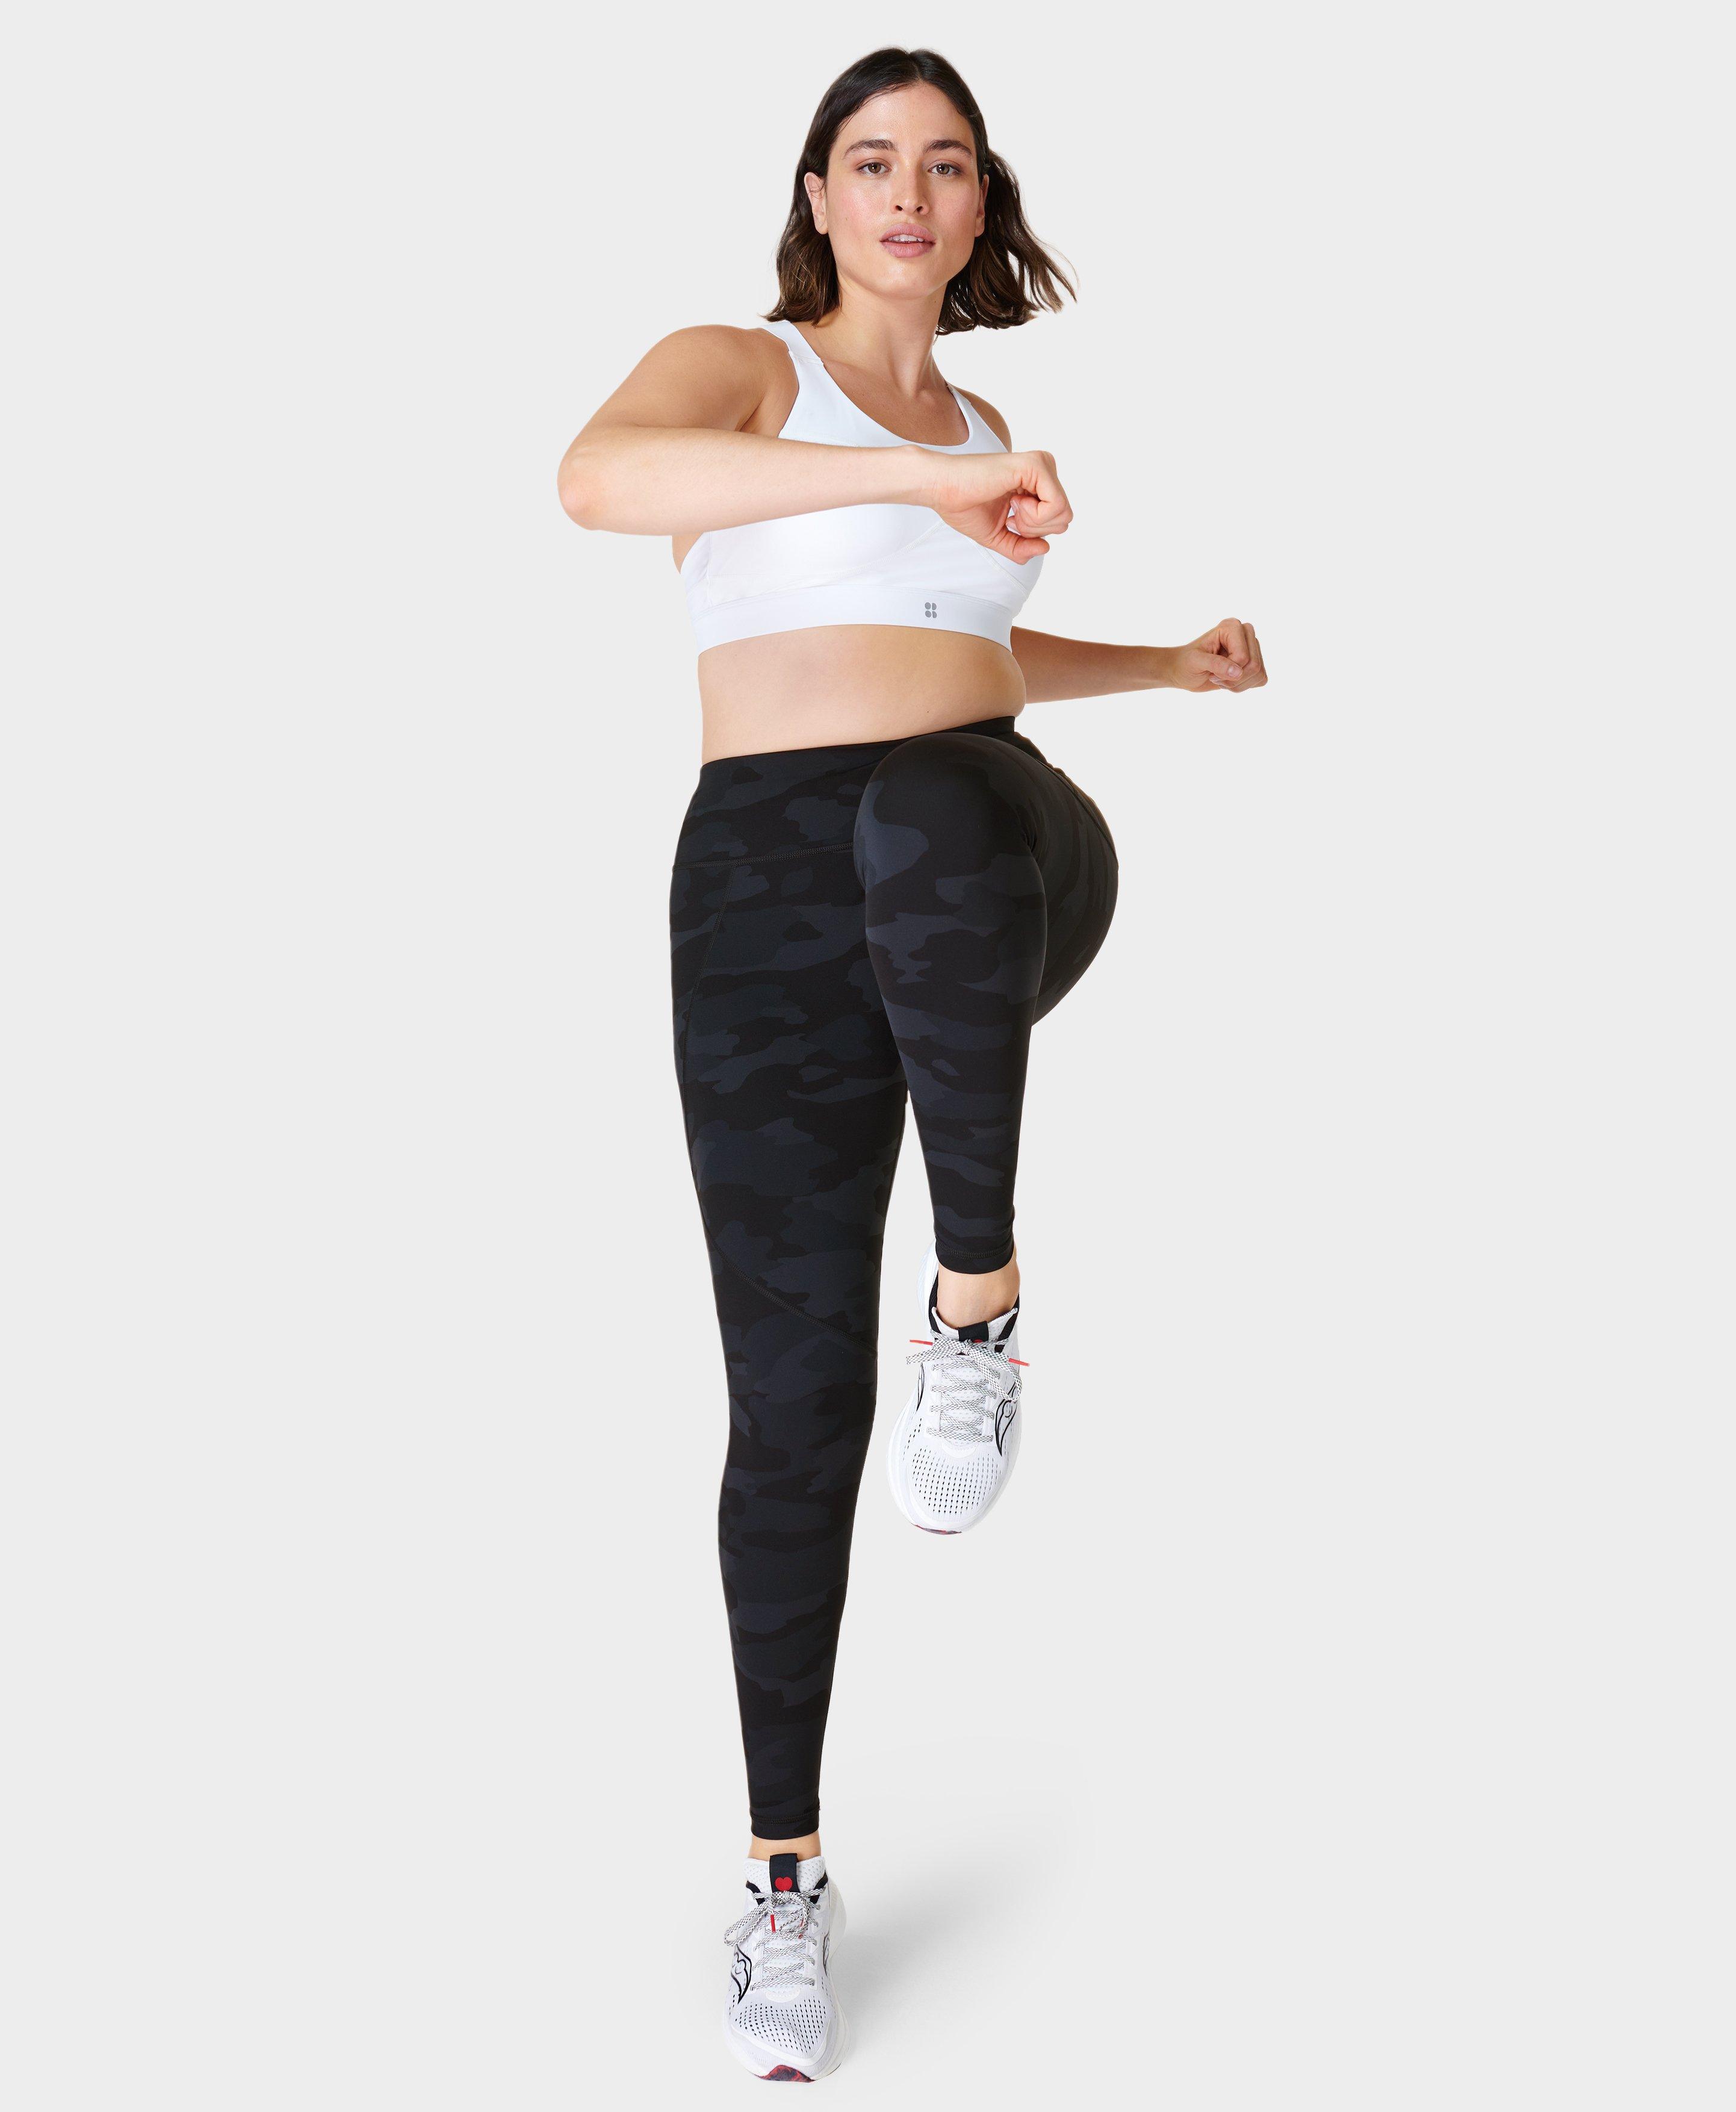 Croc Fit - Check out our Black Camo High Waisted Leggings